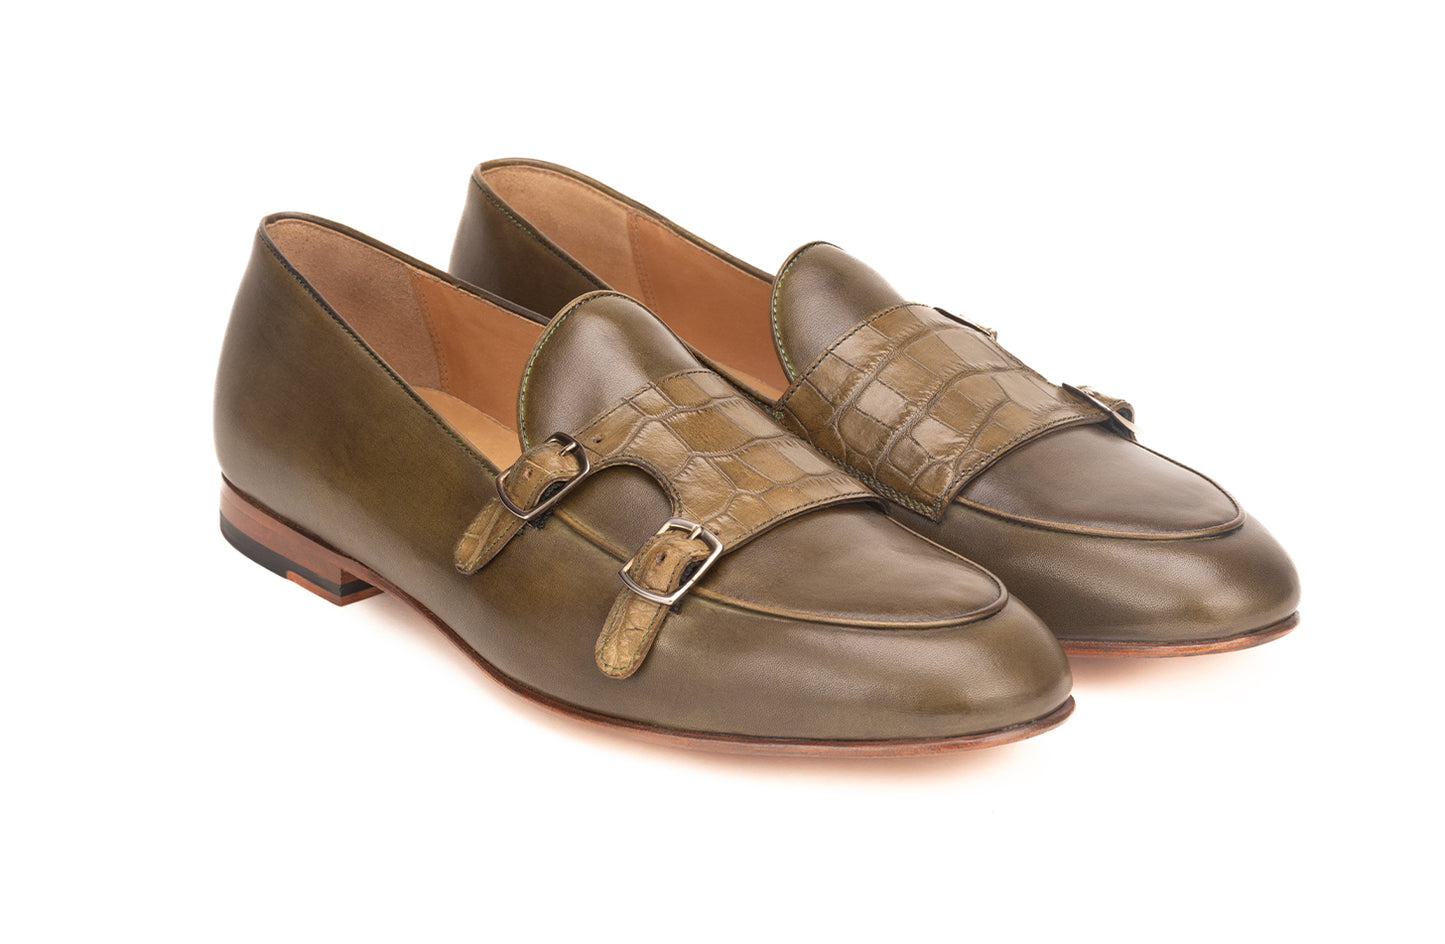 Doublemonk loafer with Croc embossed straps